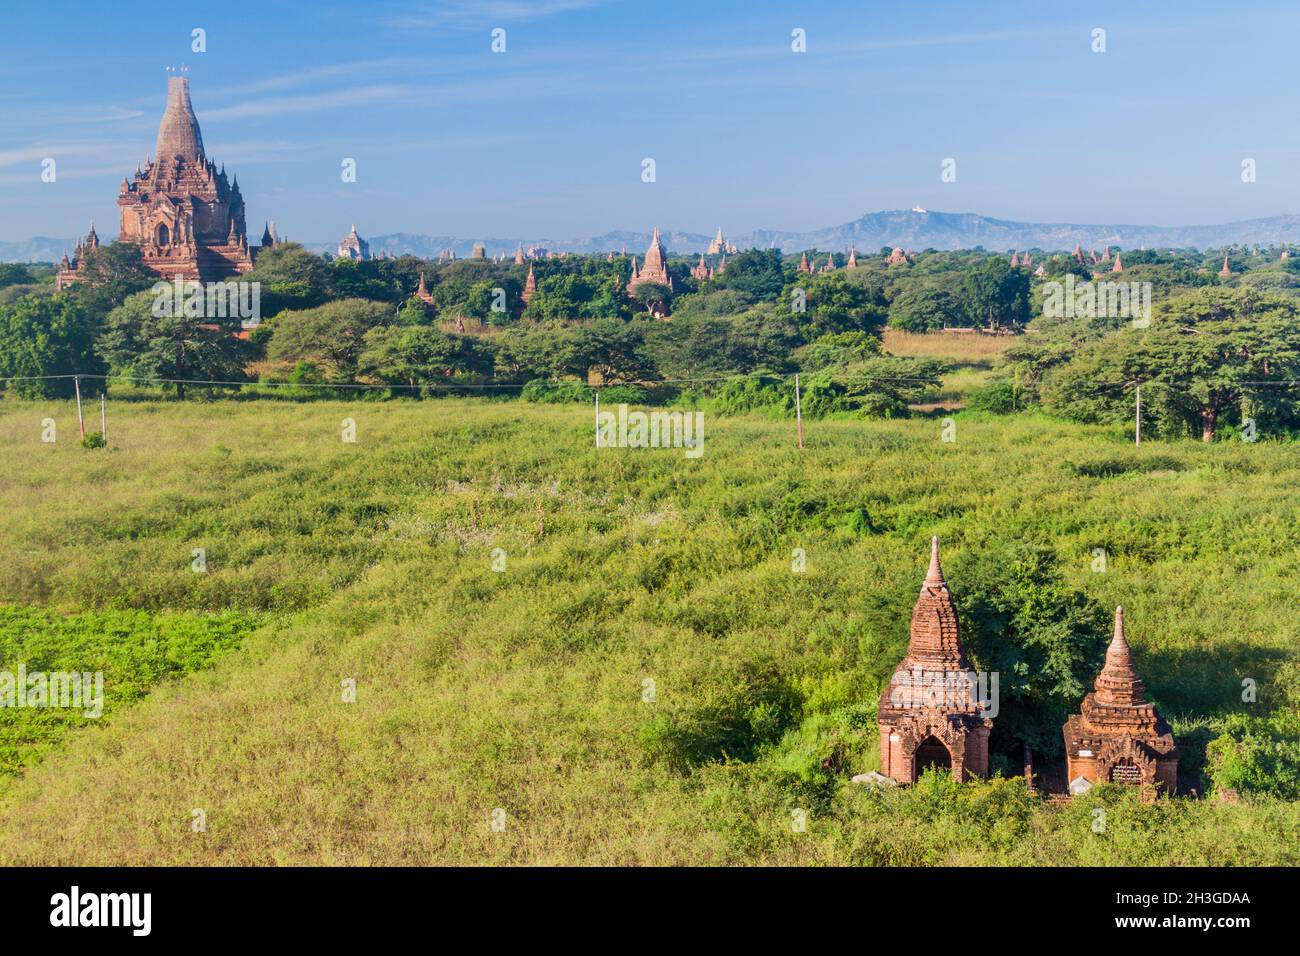 Skyline of temples in Bagan, Myanmar. Bulethi temple in the left. Stock Photo